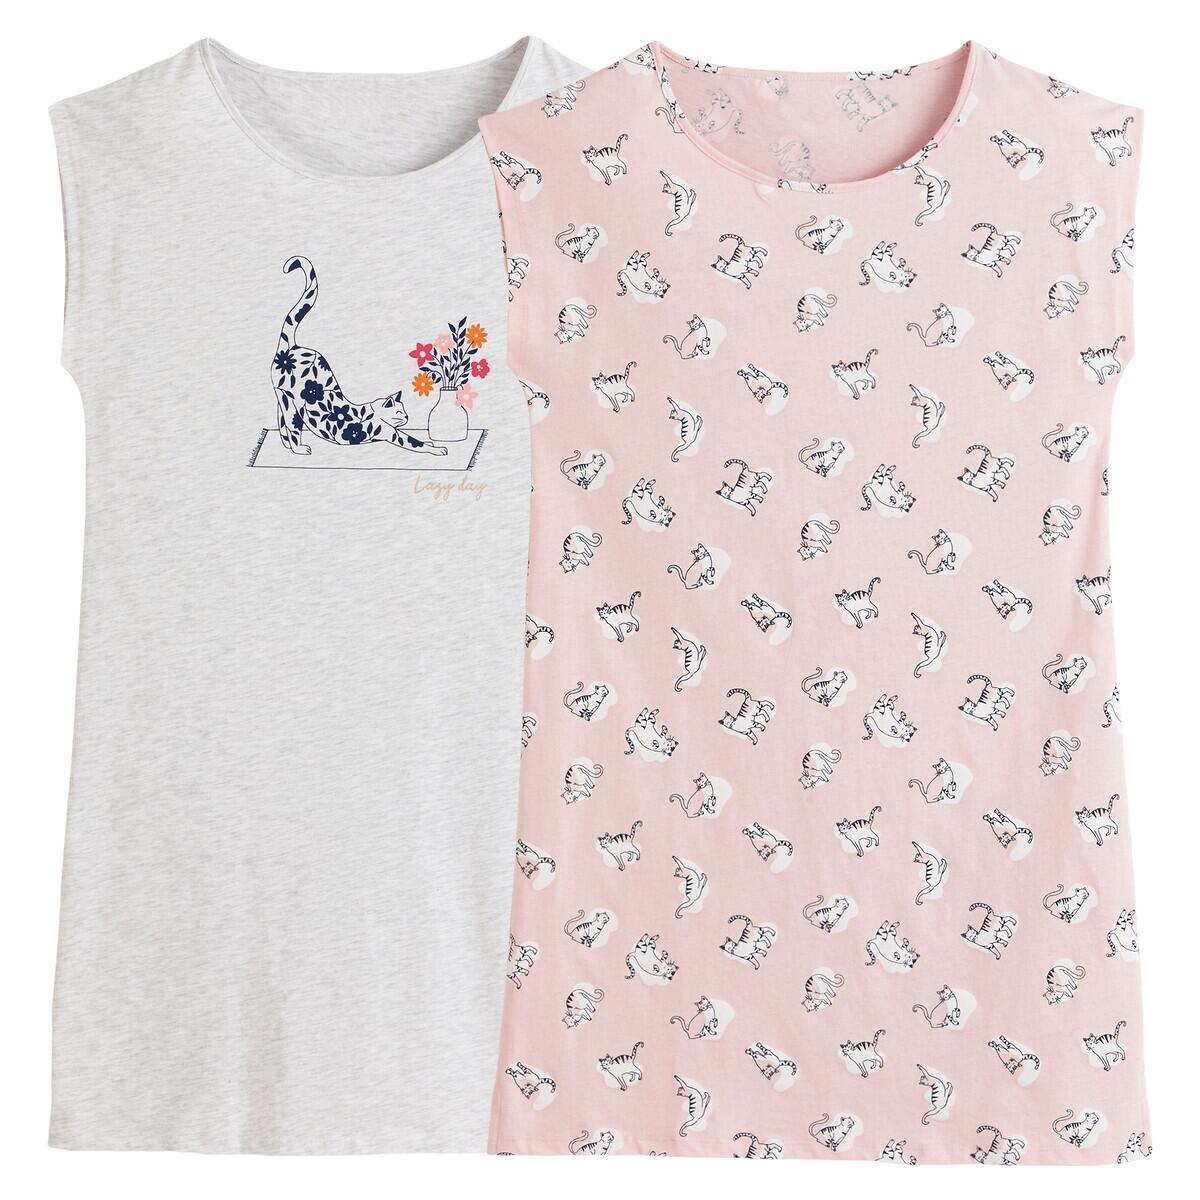 Pack of 2 Sleeveless Nightshirts in Cat Print Cotton